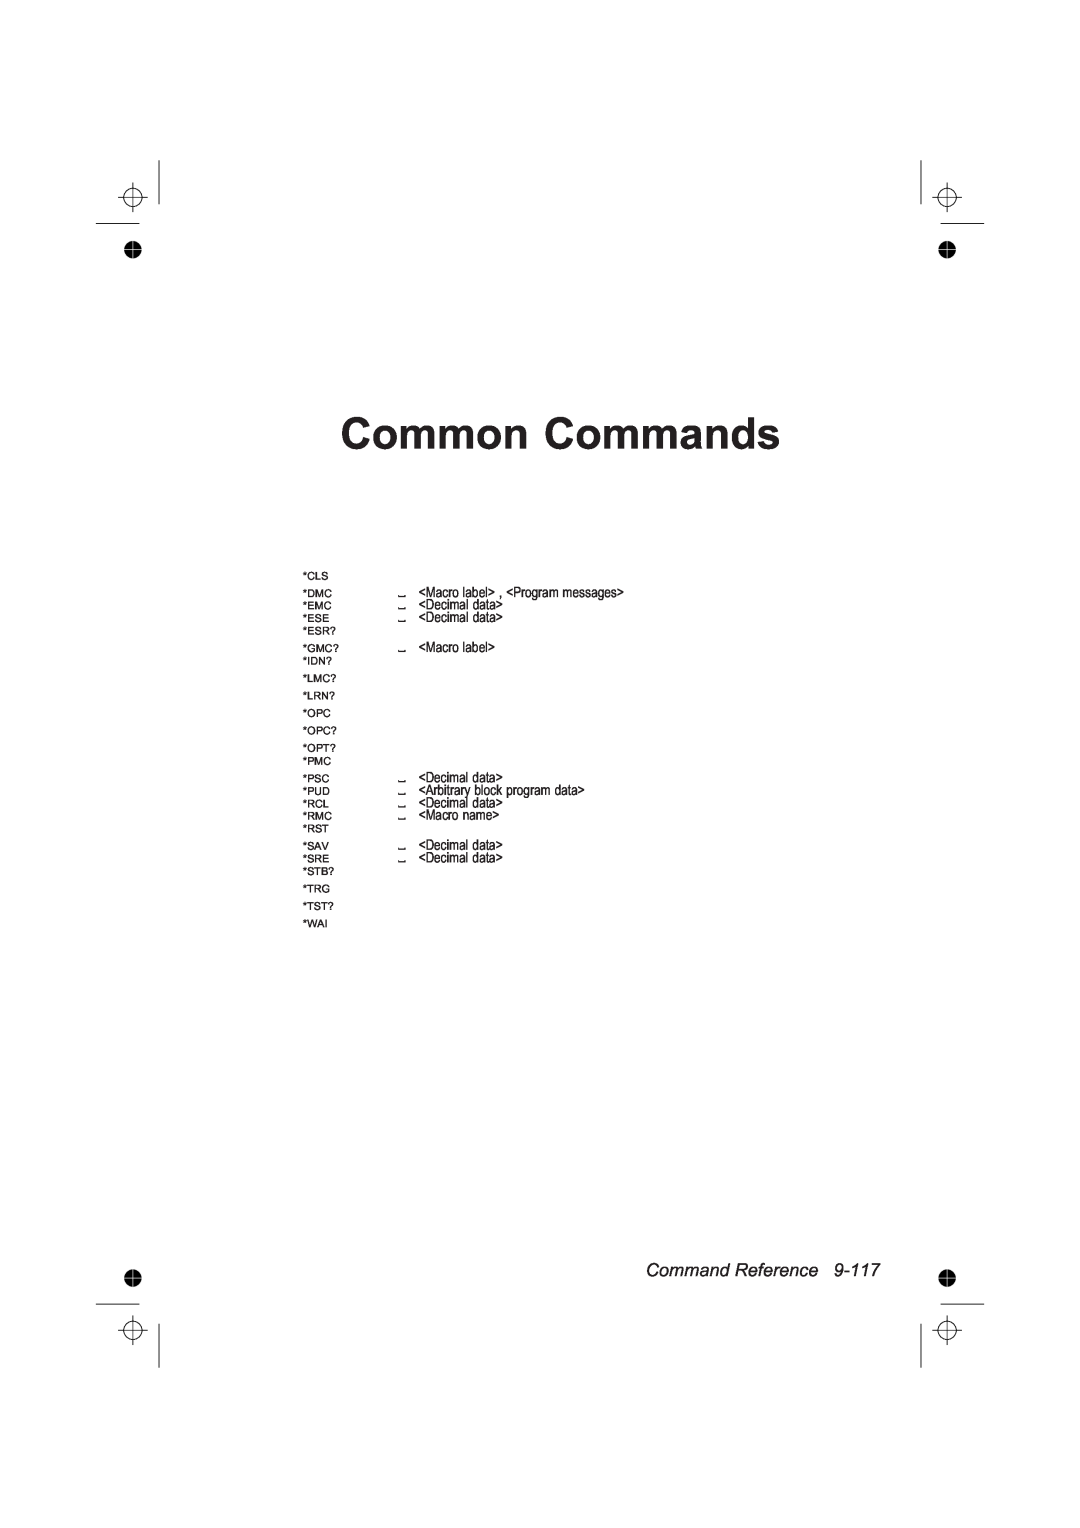 Fluke PM6681R, PM6685R manual Common Commands, Command Reference 